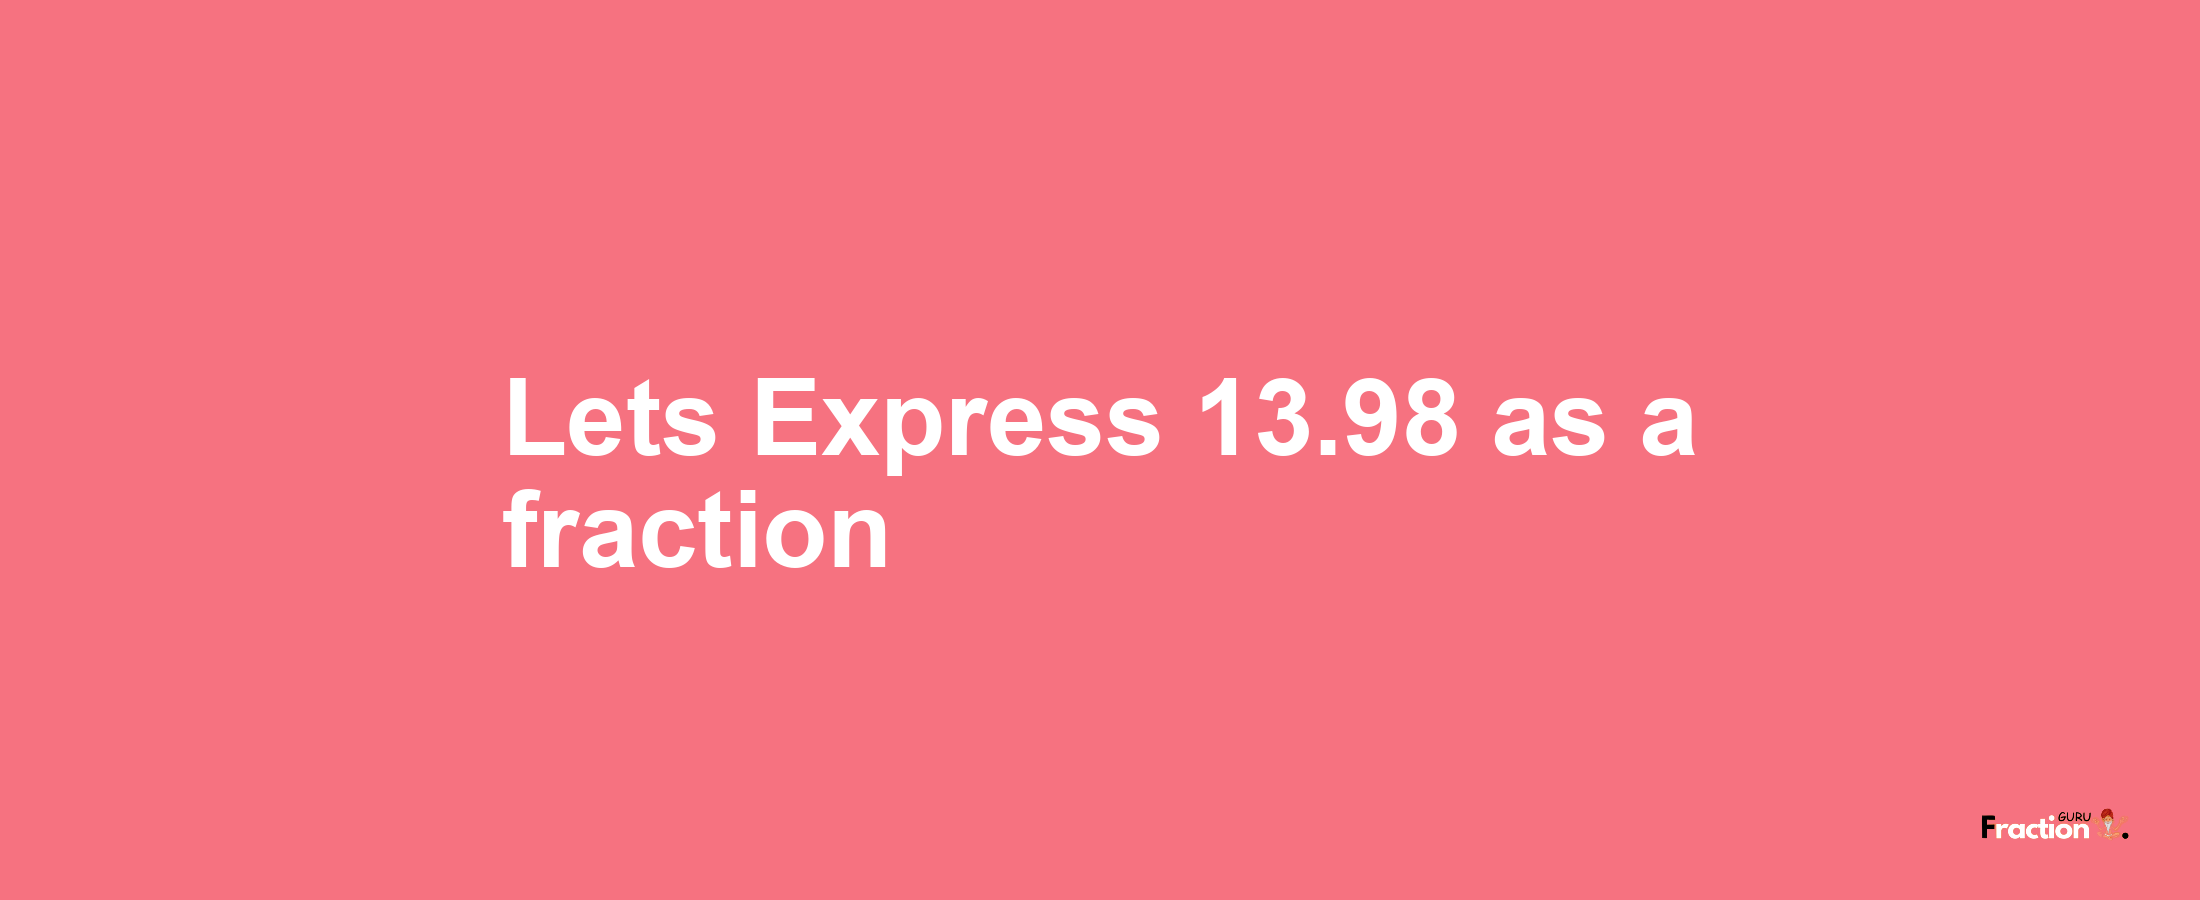 Lets Express 13.98 as afraction